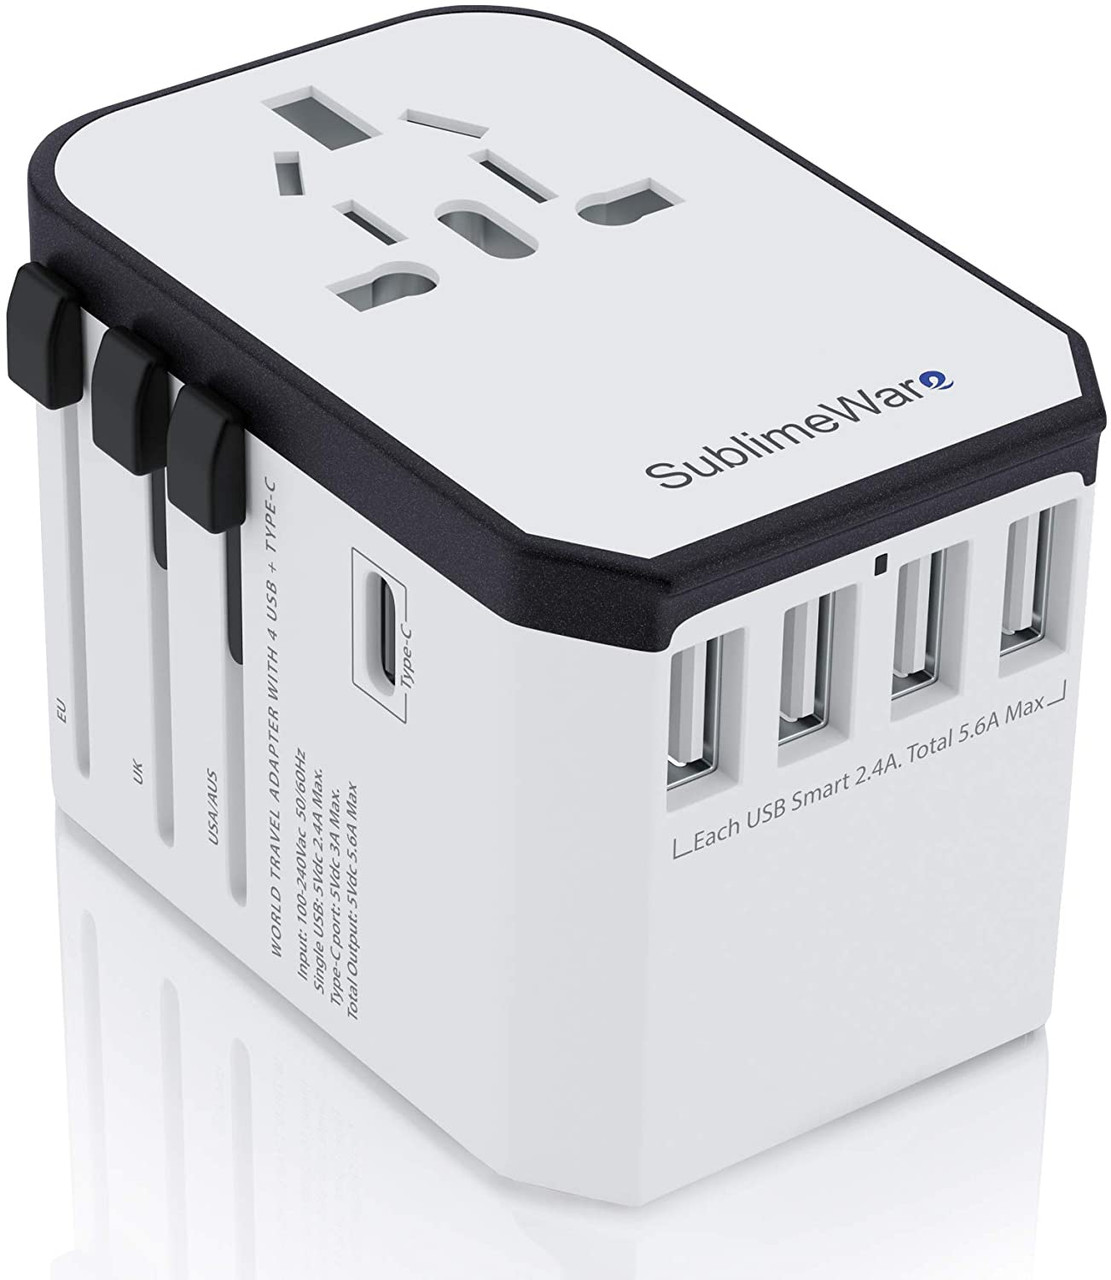 Power Plug Adapter - International Travel (w/5 USB Ports and USB Type C)-  Work 150+ Countries - 220 Volt Adapter - Travel Adapter - Type C A G I A/C  - UK Japan China EU Europe European (JY-305PLUS)